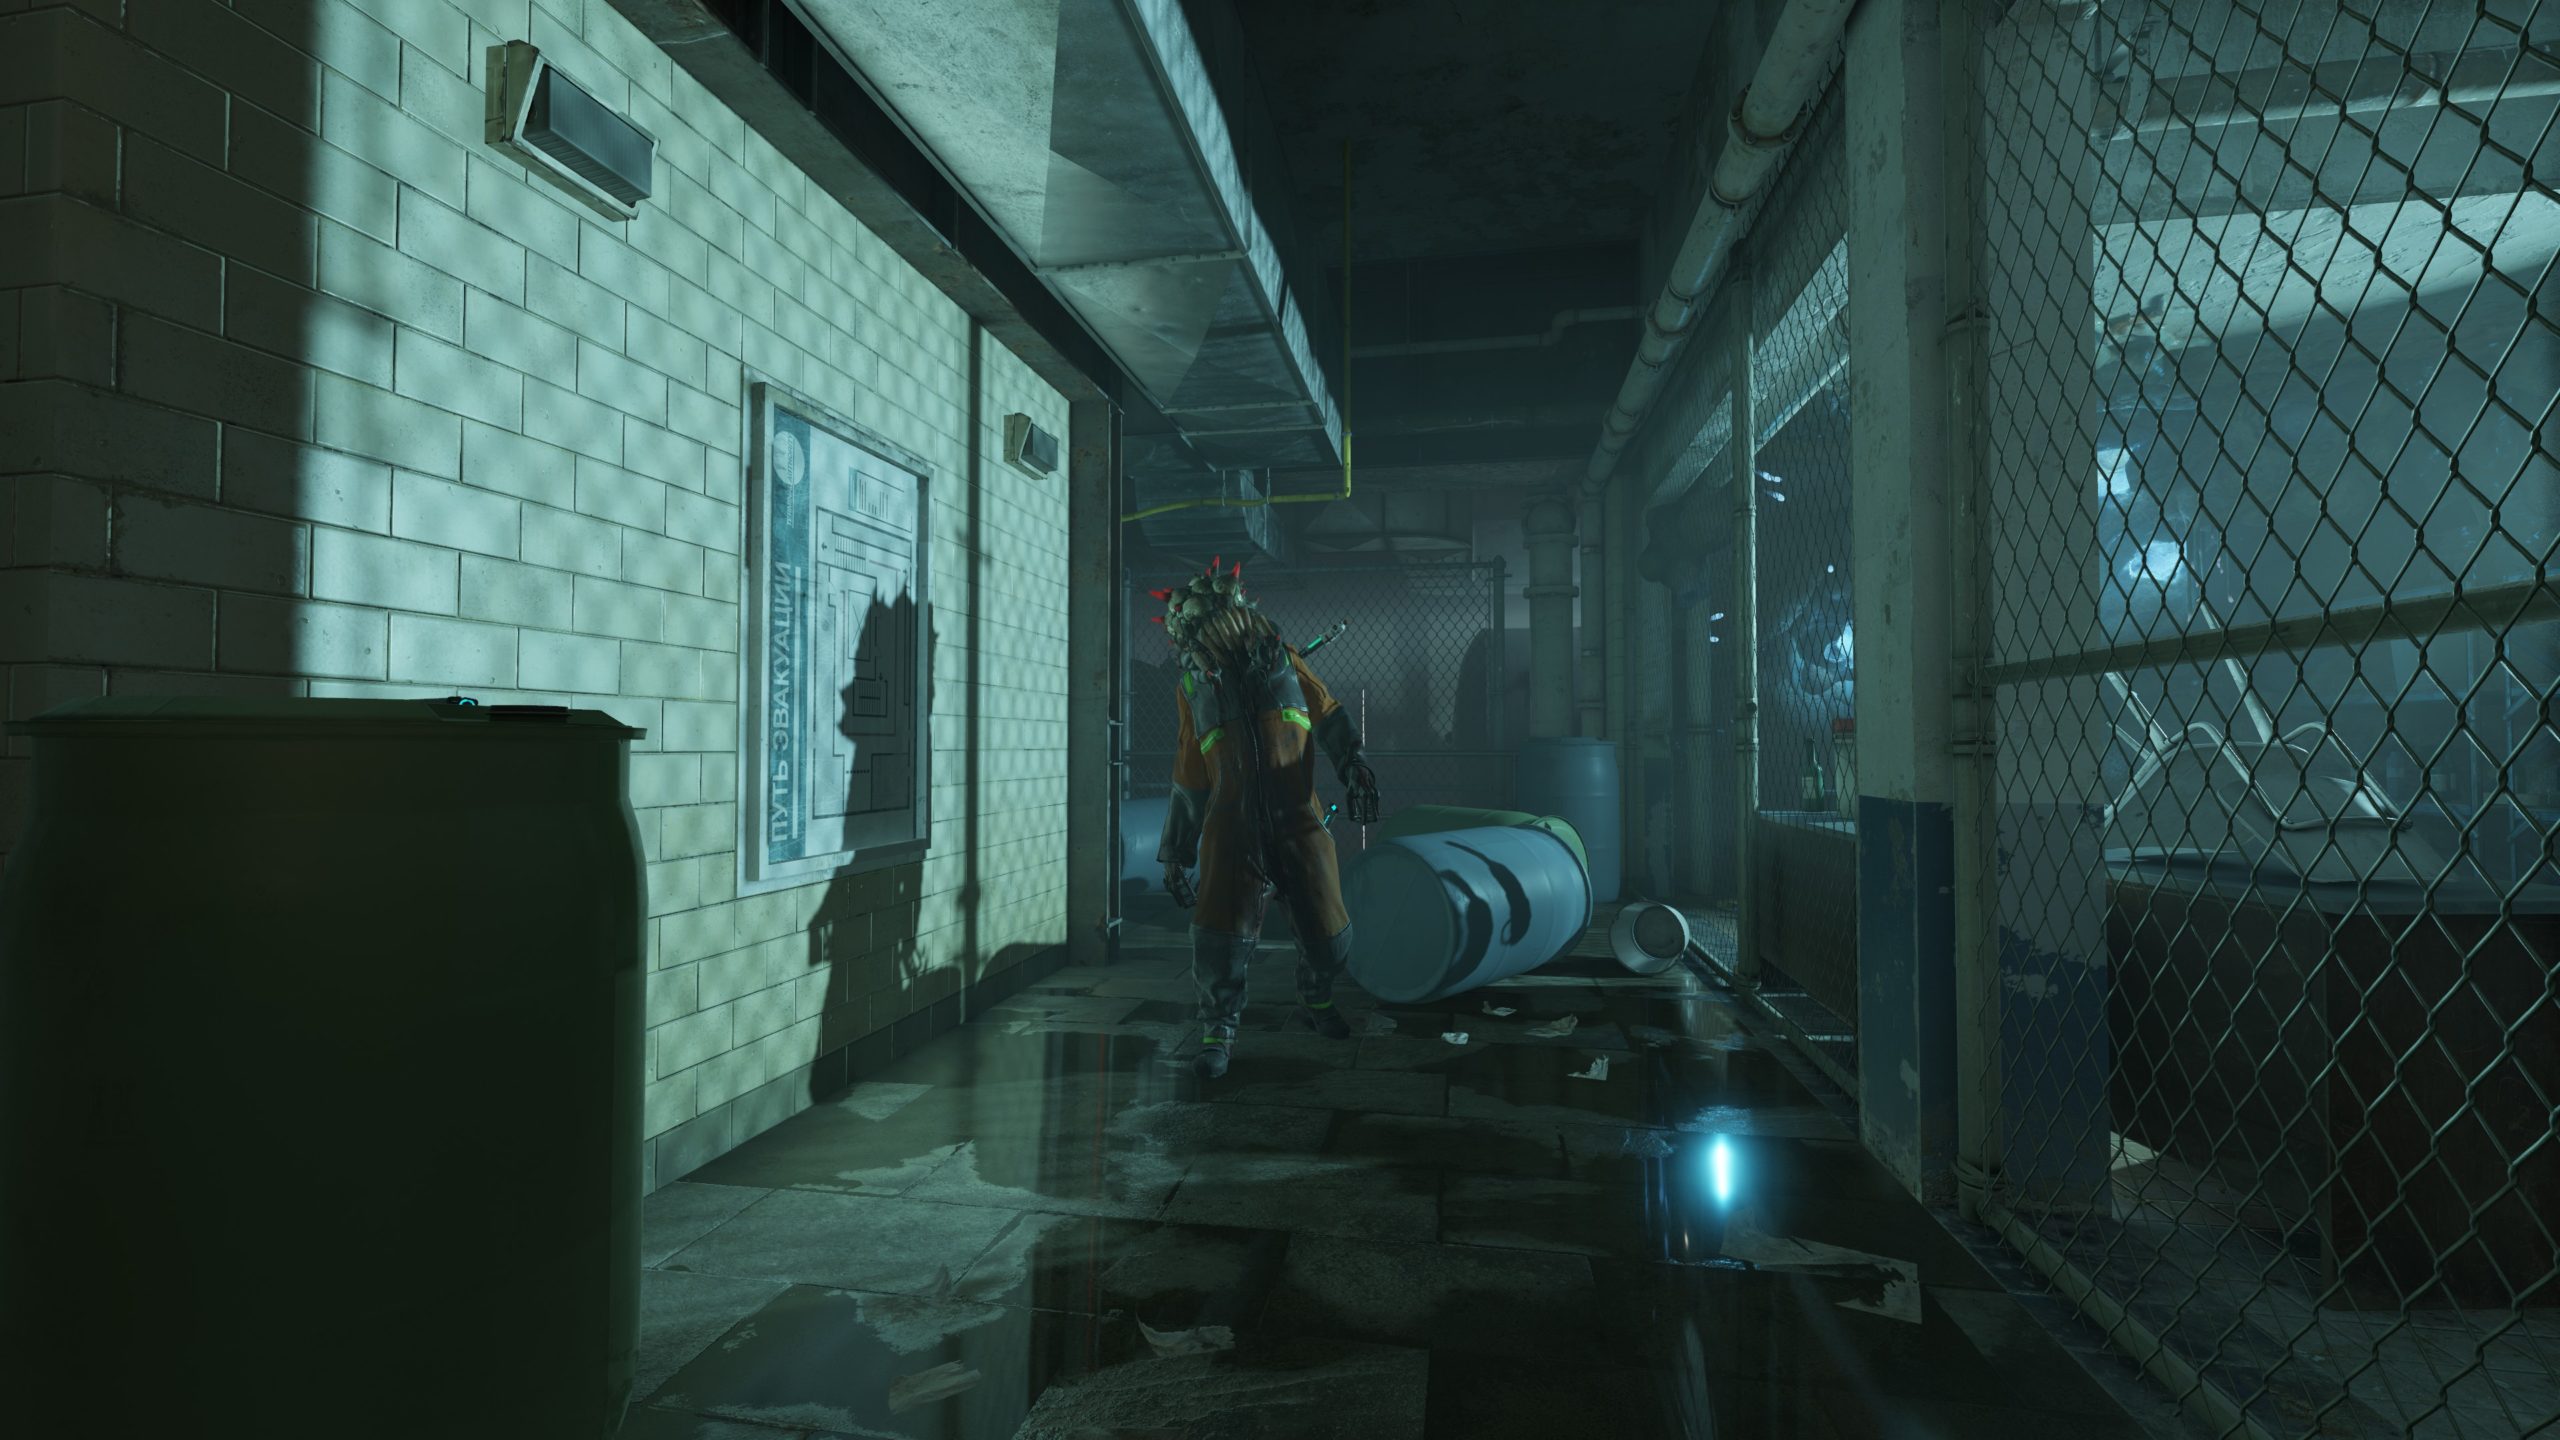 Valve shows Half-Life: Alyx features in three new gameplay videos